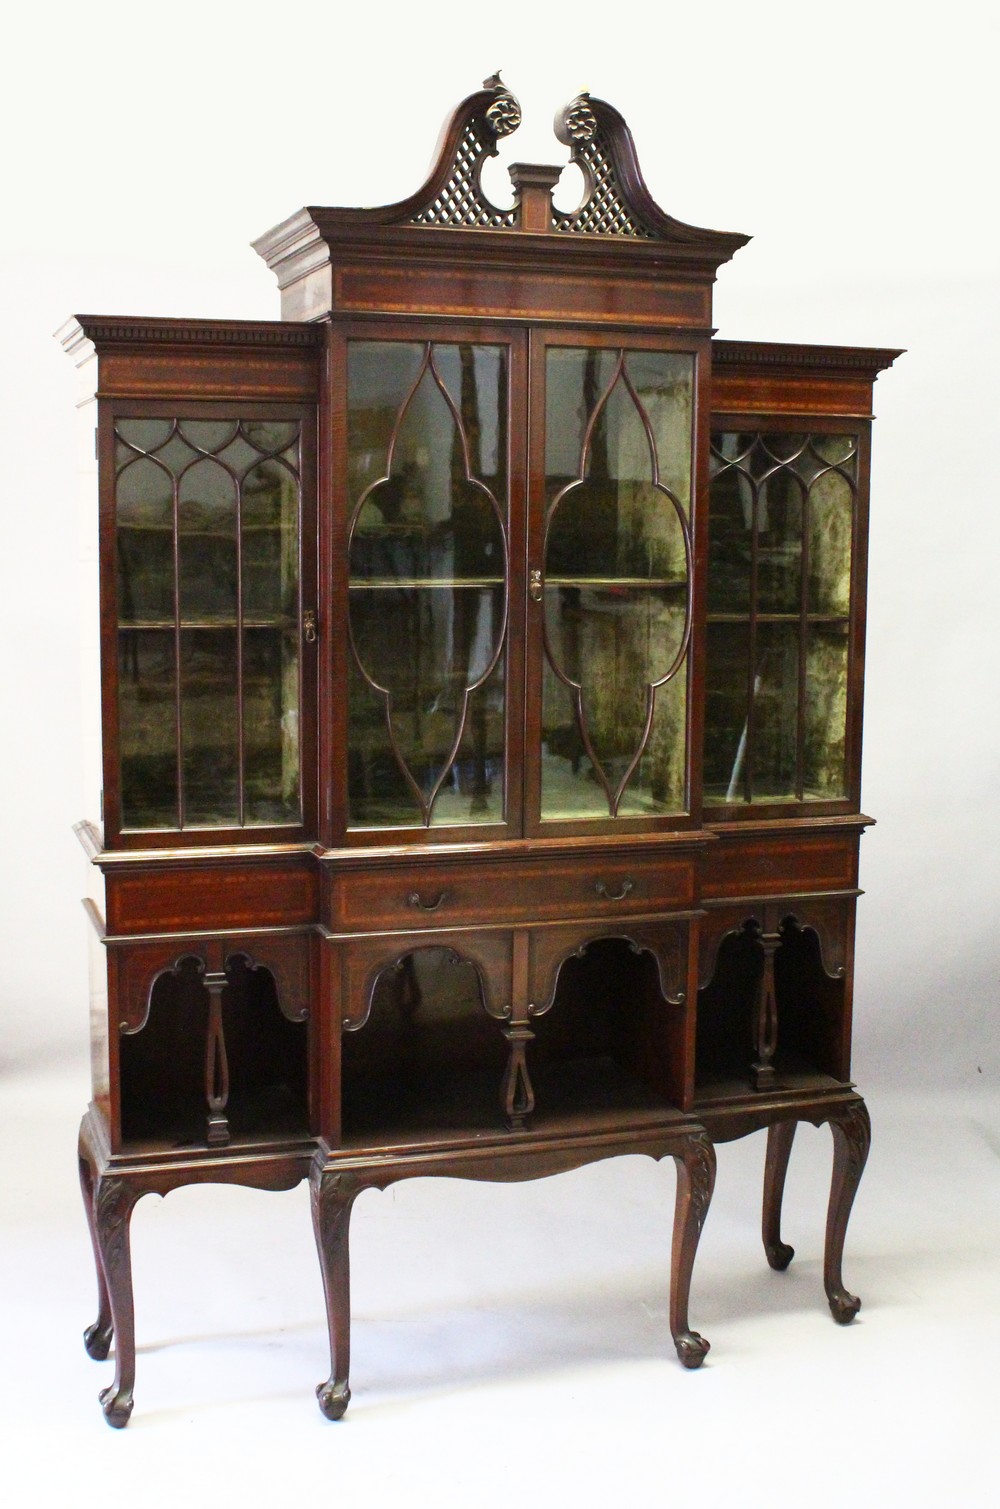 AN EDWARDIAN MAHOGANY BREAKFRONT STANDING BOOKCASE, the top with swan neck pediment, over four glass